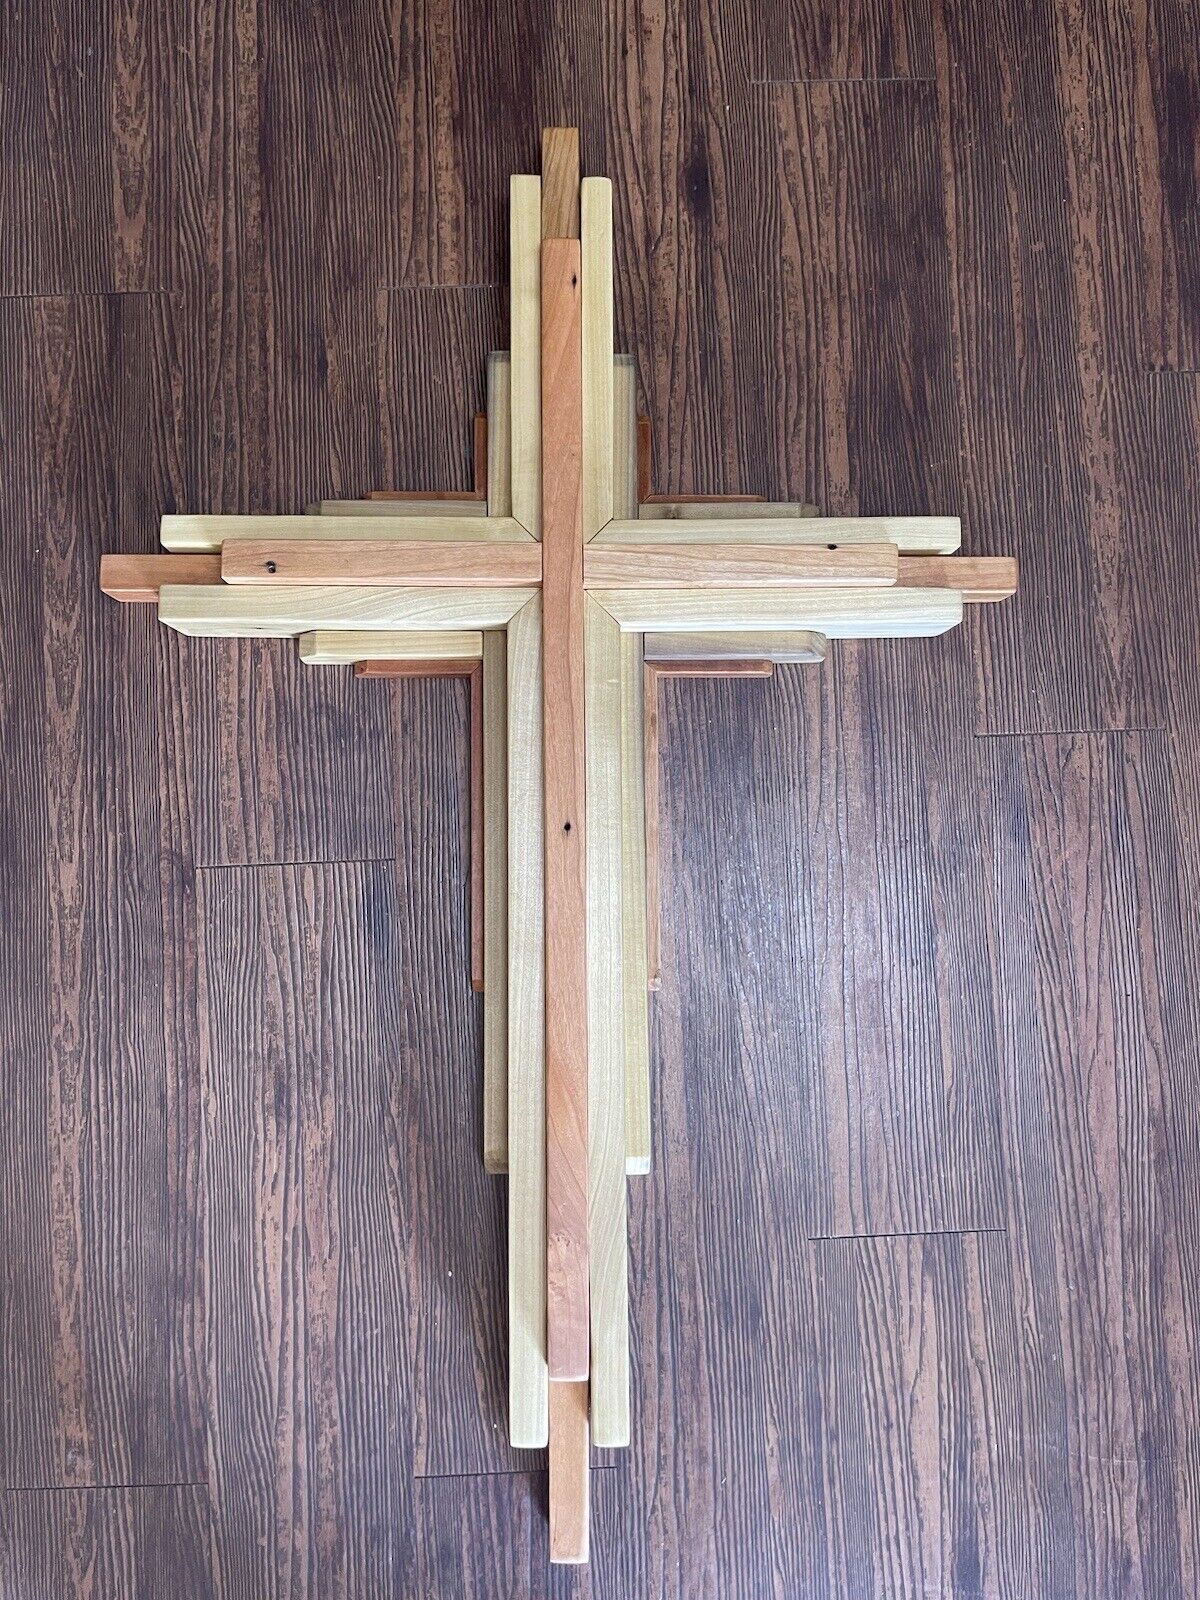 42” by 27” Handmade Wooden Cross with Teak Oil Finish